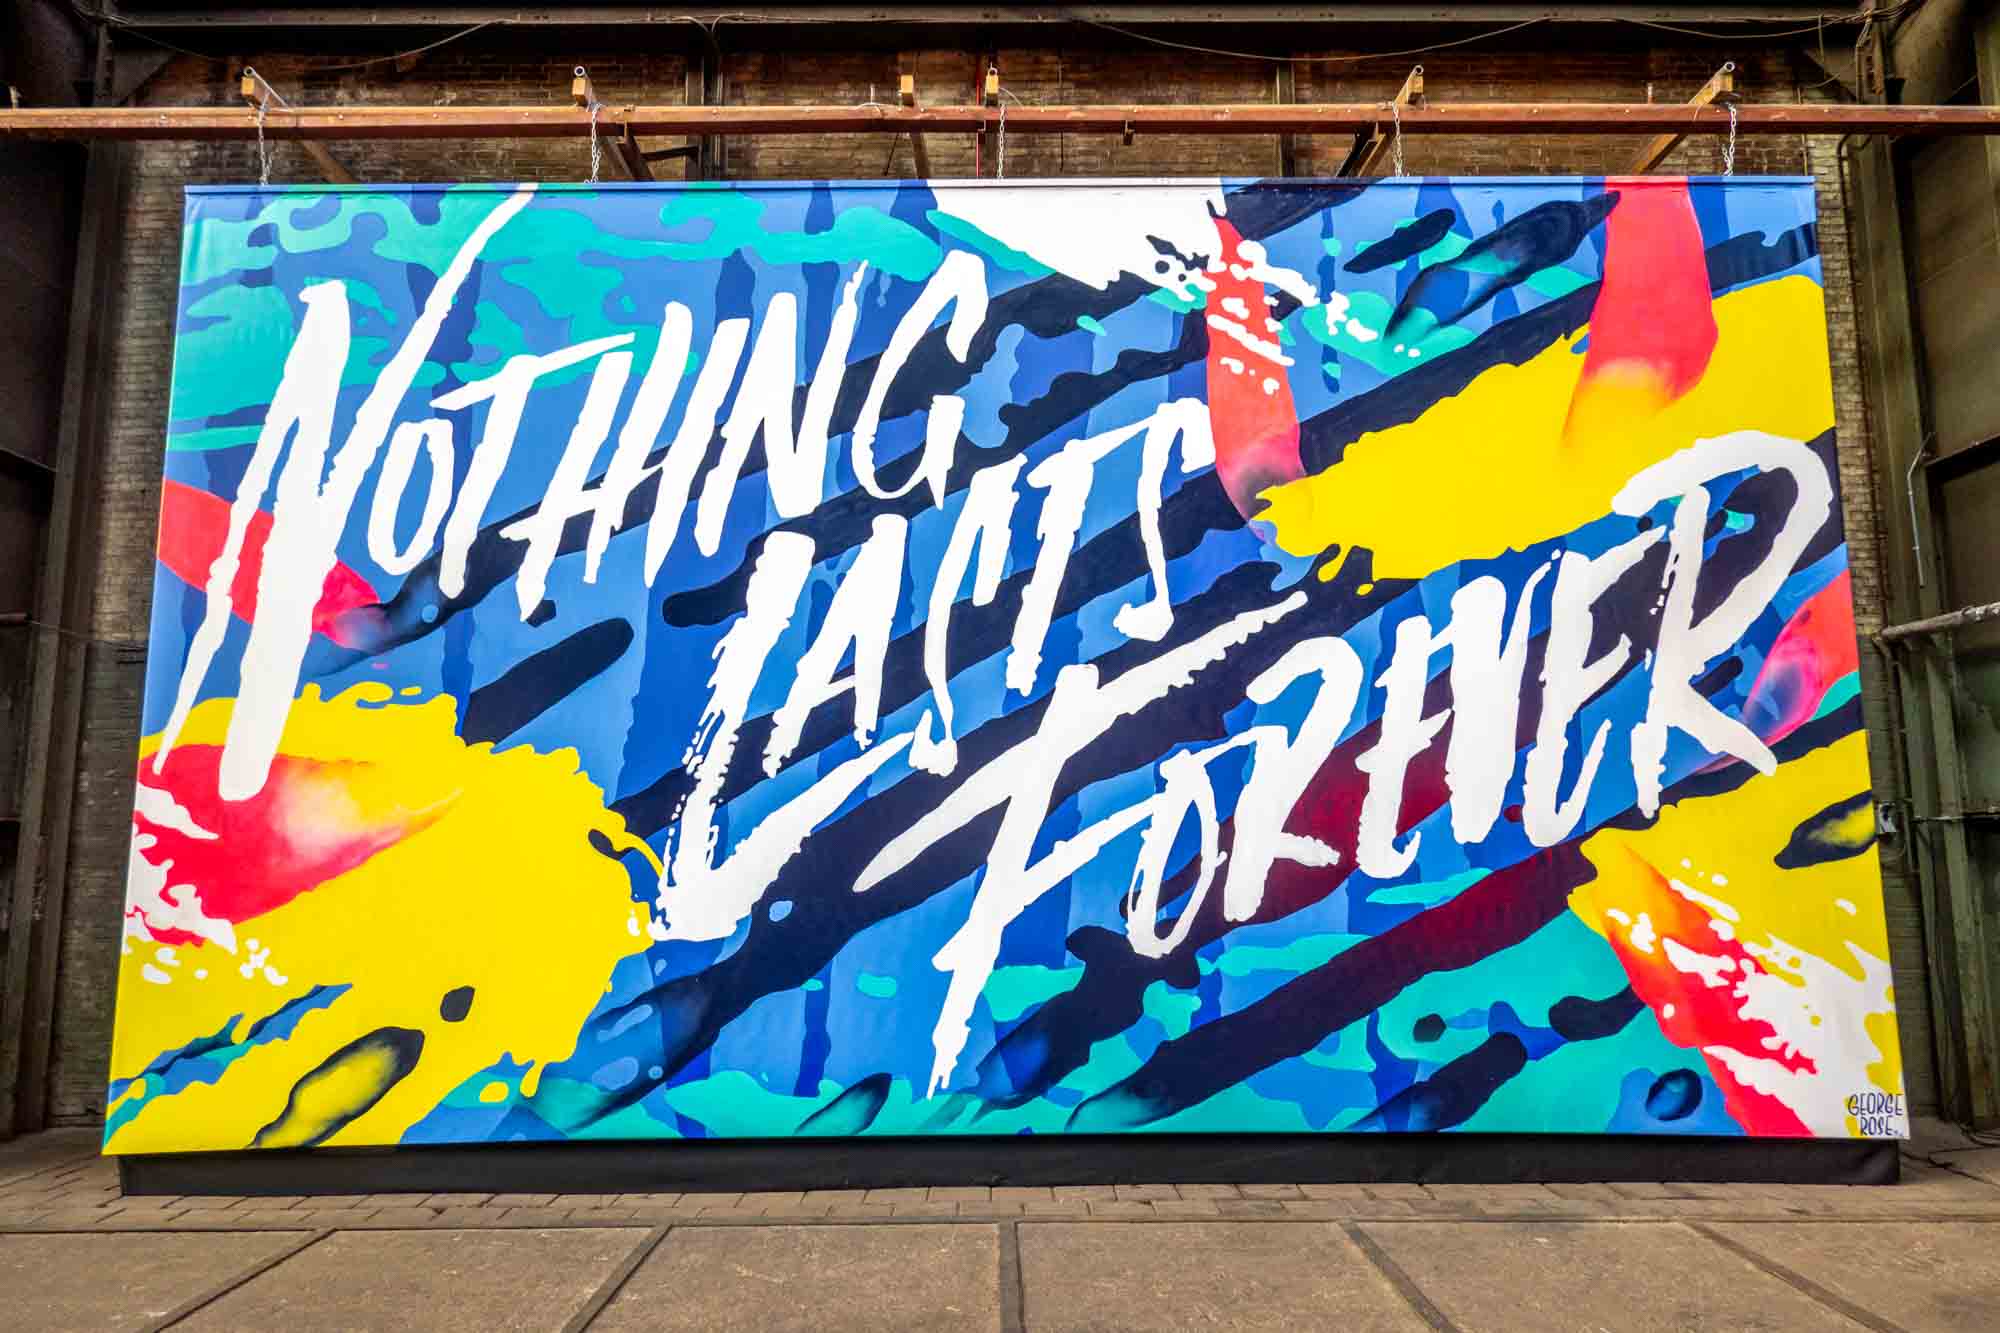 Colorful mural that says "Nothing Lasts Forever"